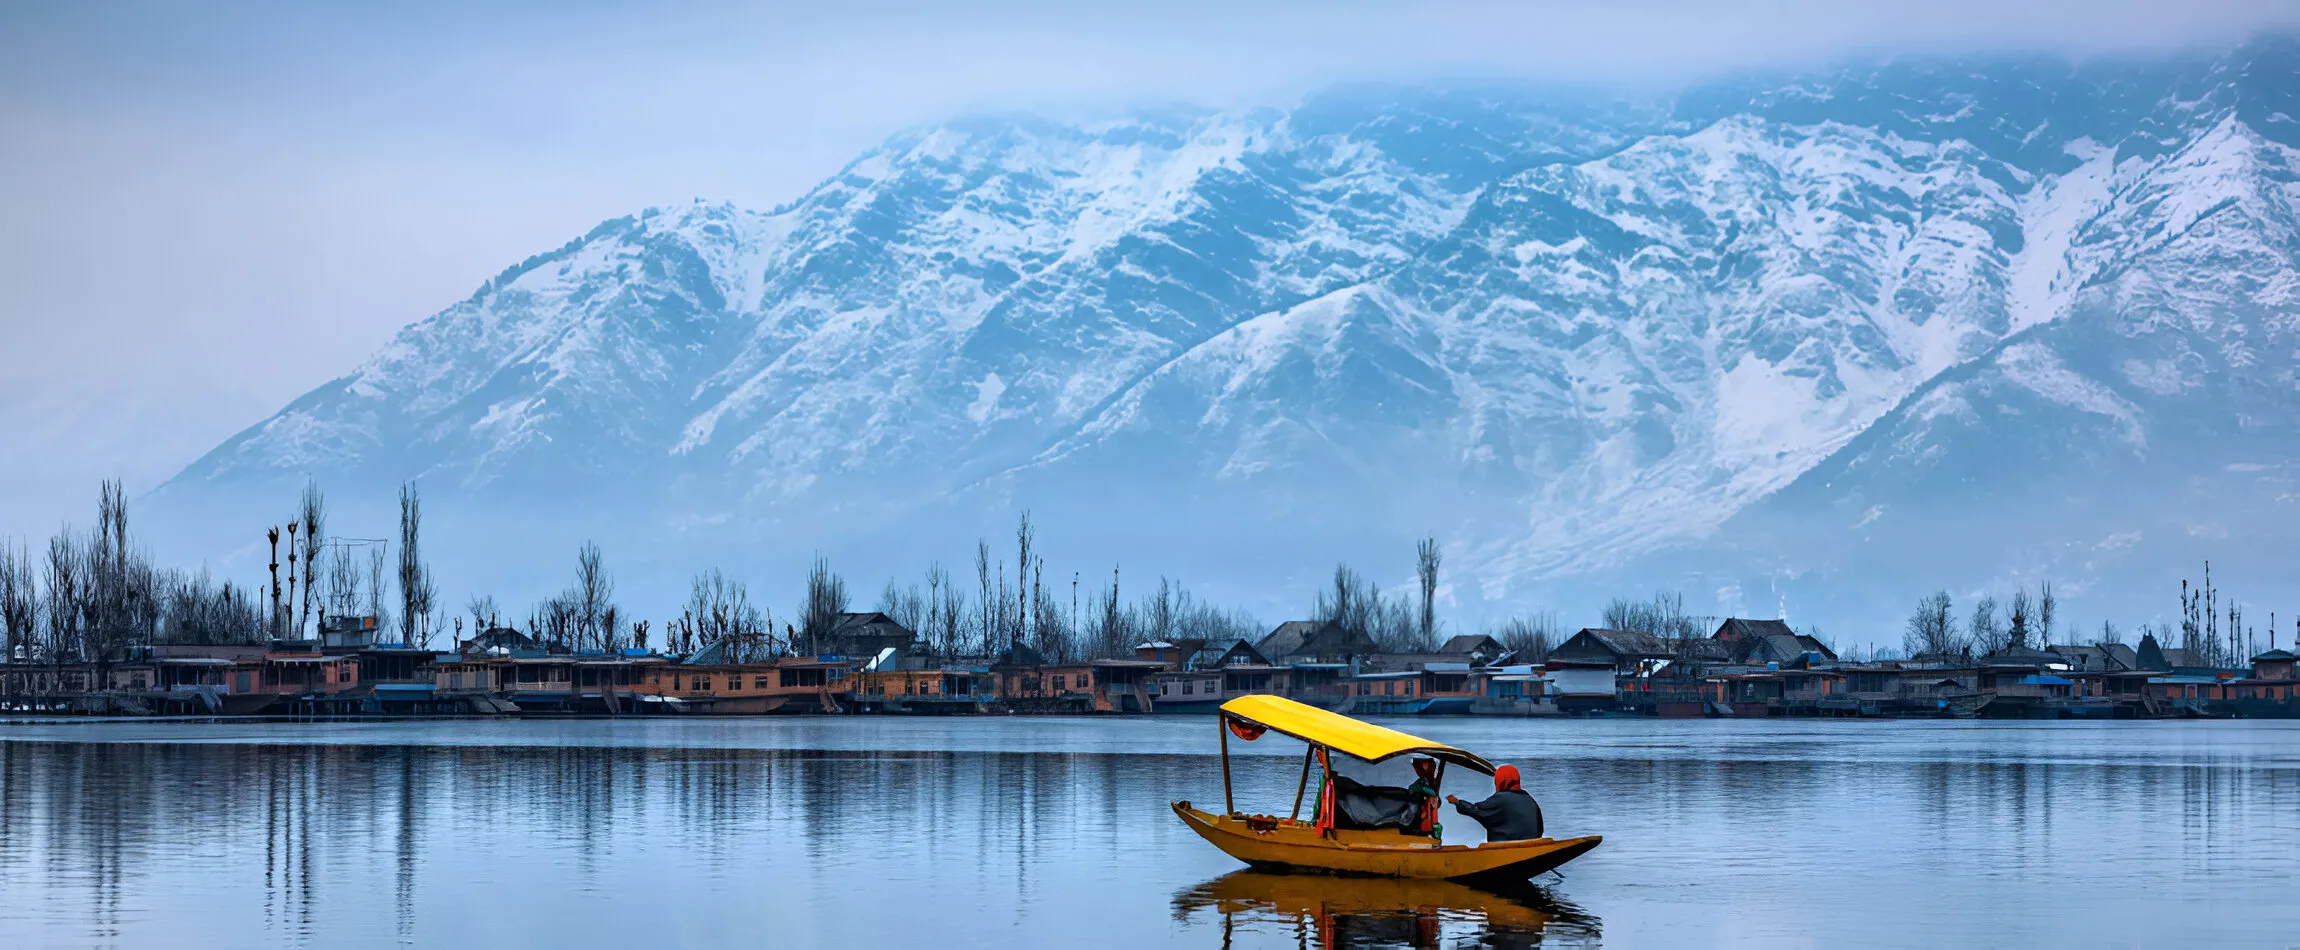 Best Locations to Visit in Kashmir from Jammu